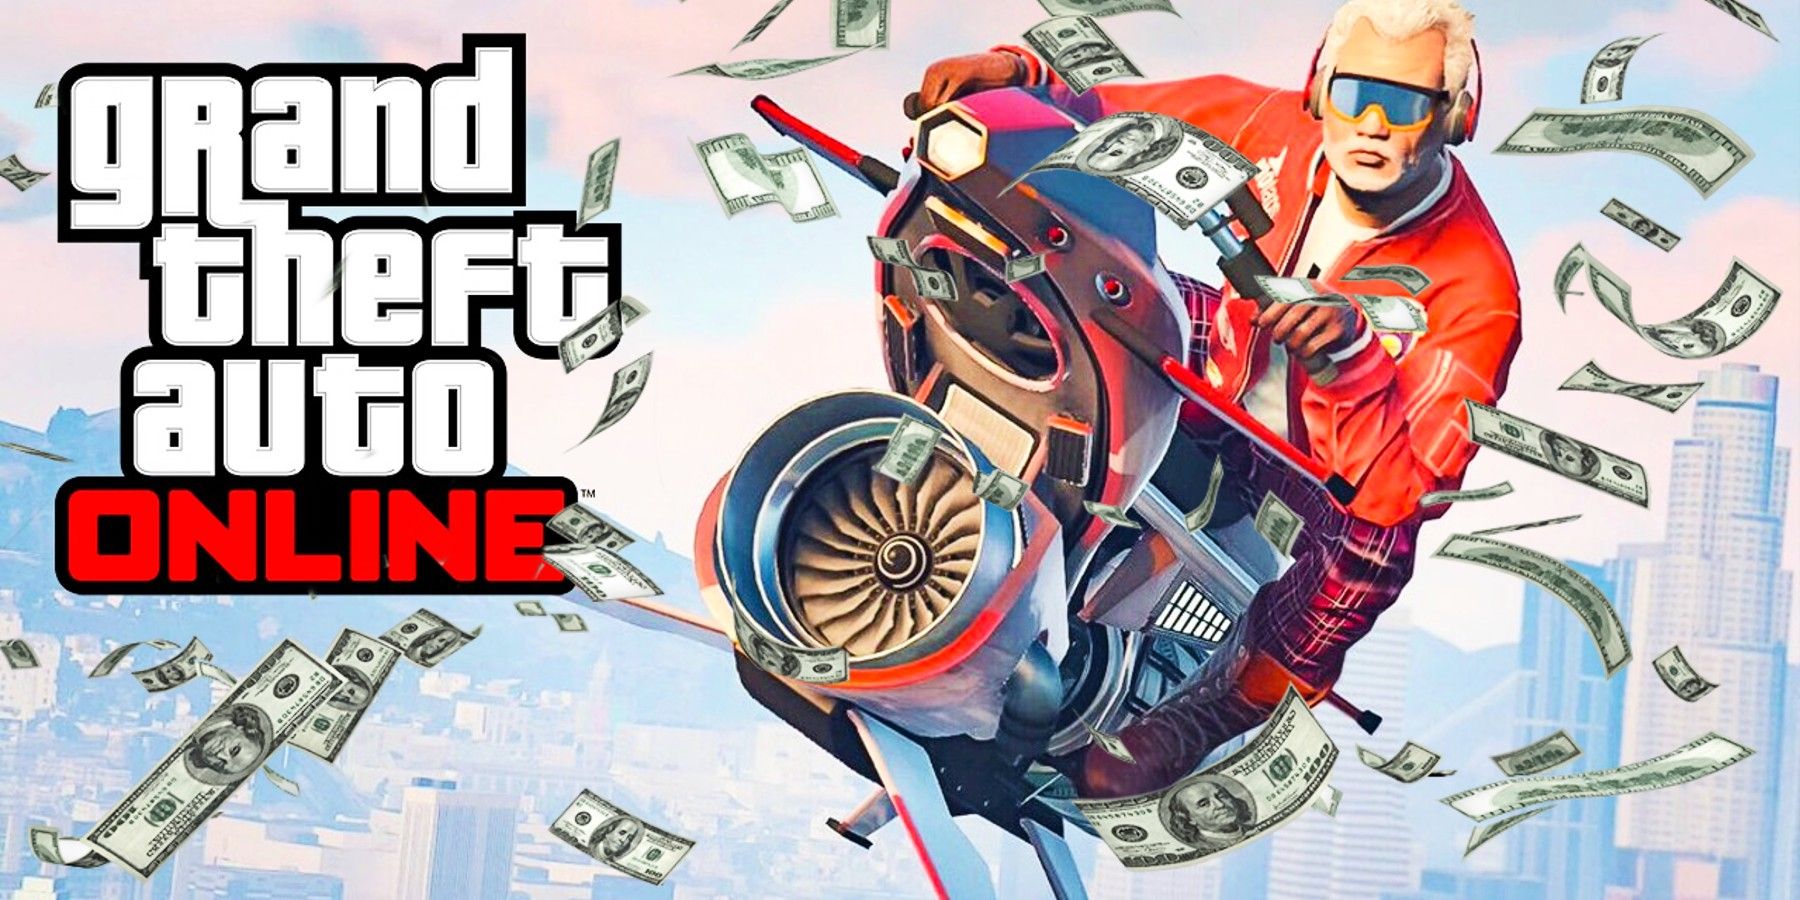 GTA Online This Week’s Limited Bonuses and Discounts